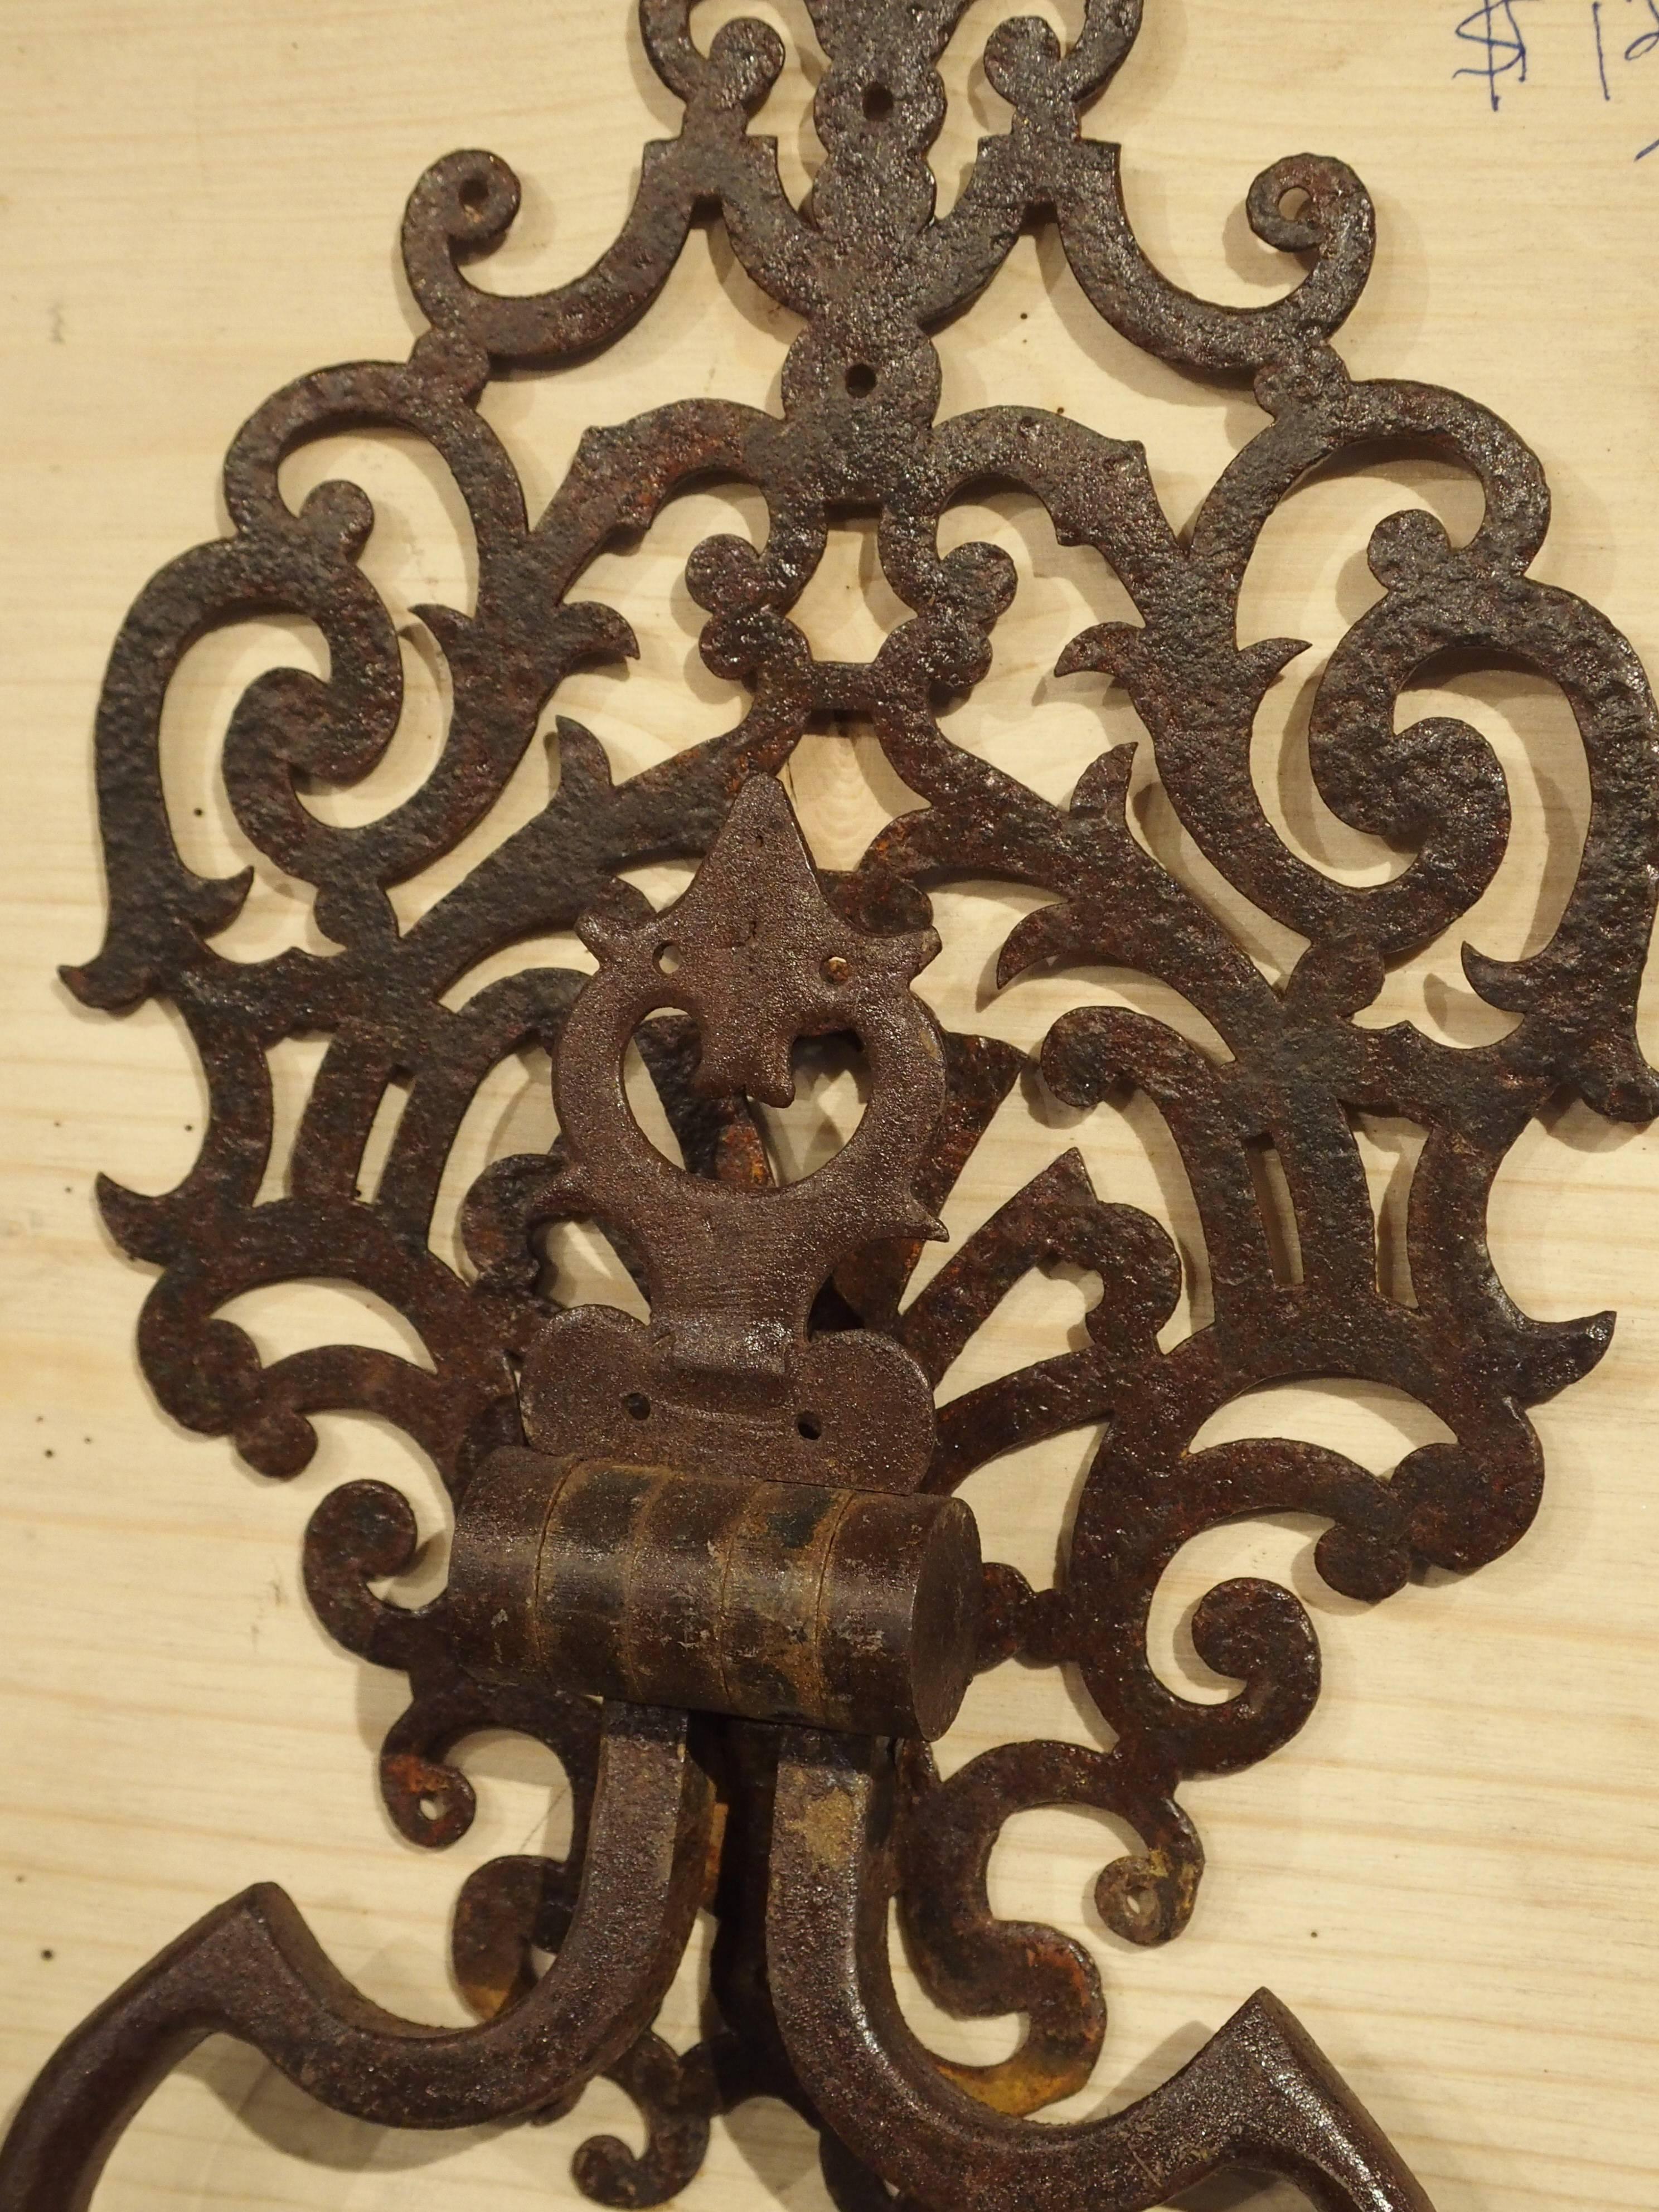 This iron door knocker is modeled from an 18th century door knocker found on a door at a chateau in the Luberon area of Provence France. This particular one has a multitude of pierced scrolls within an elongated oval shape. The door knocker itself